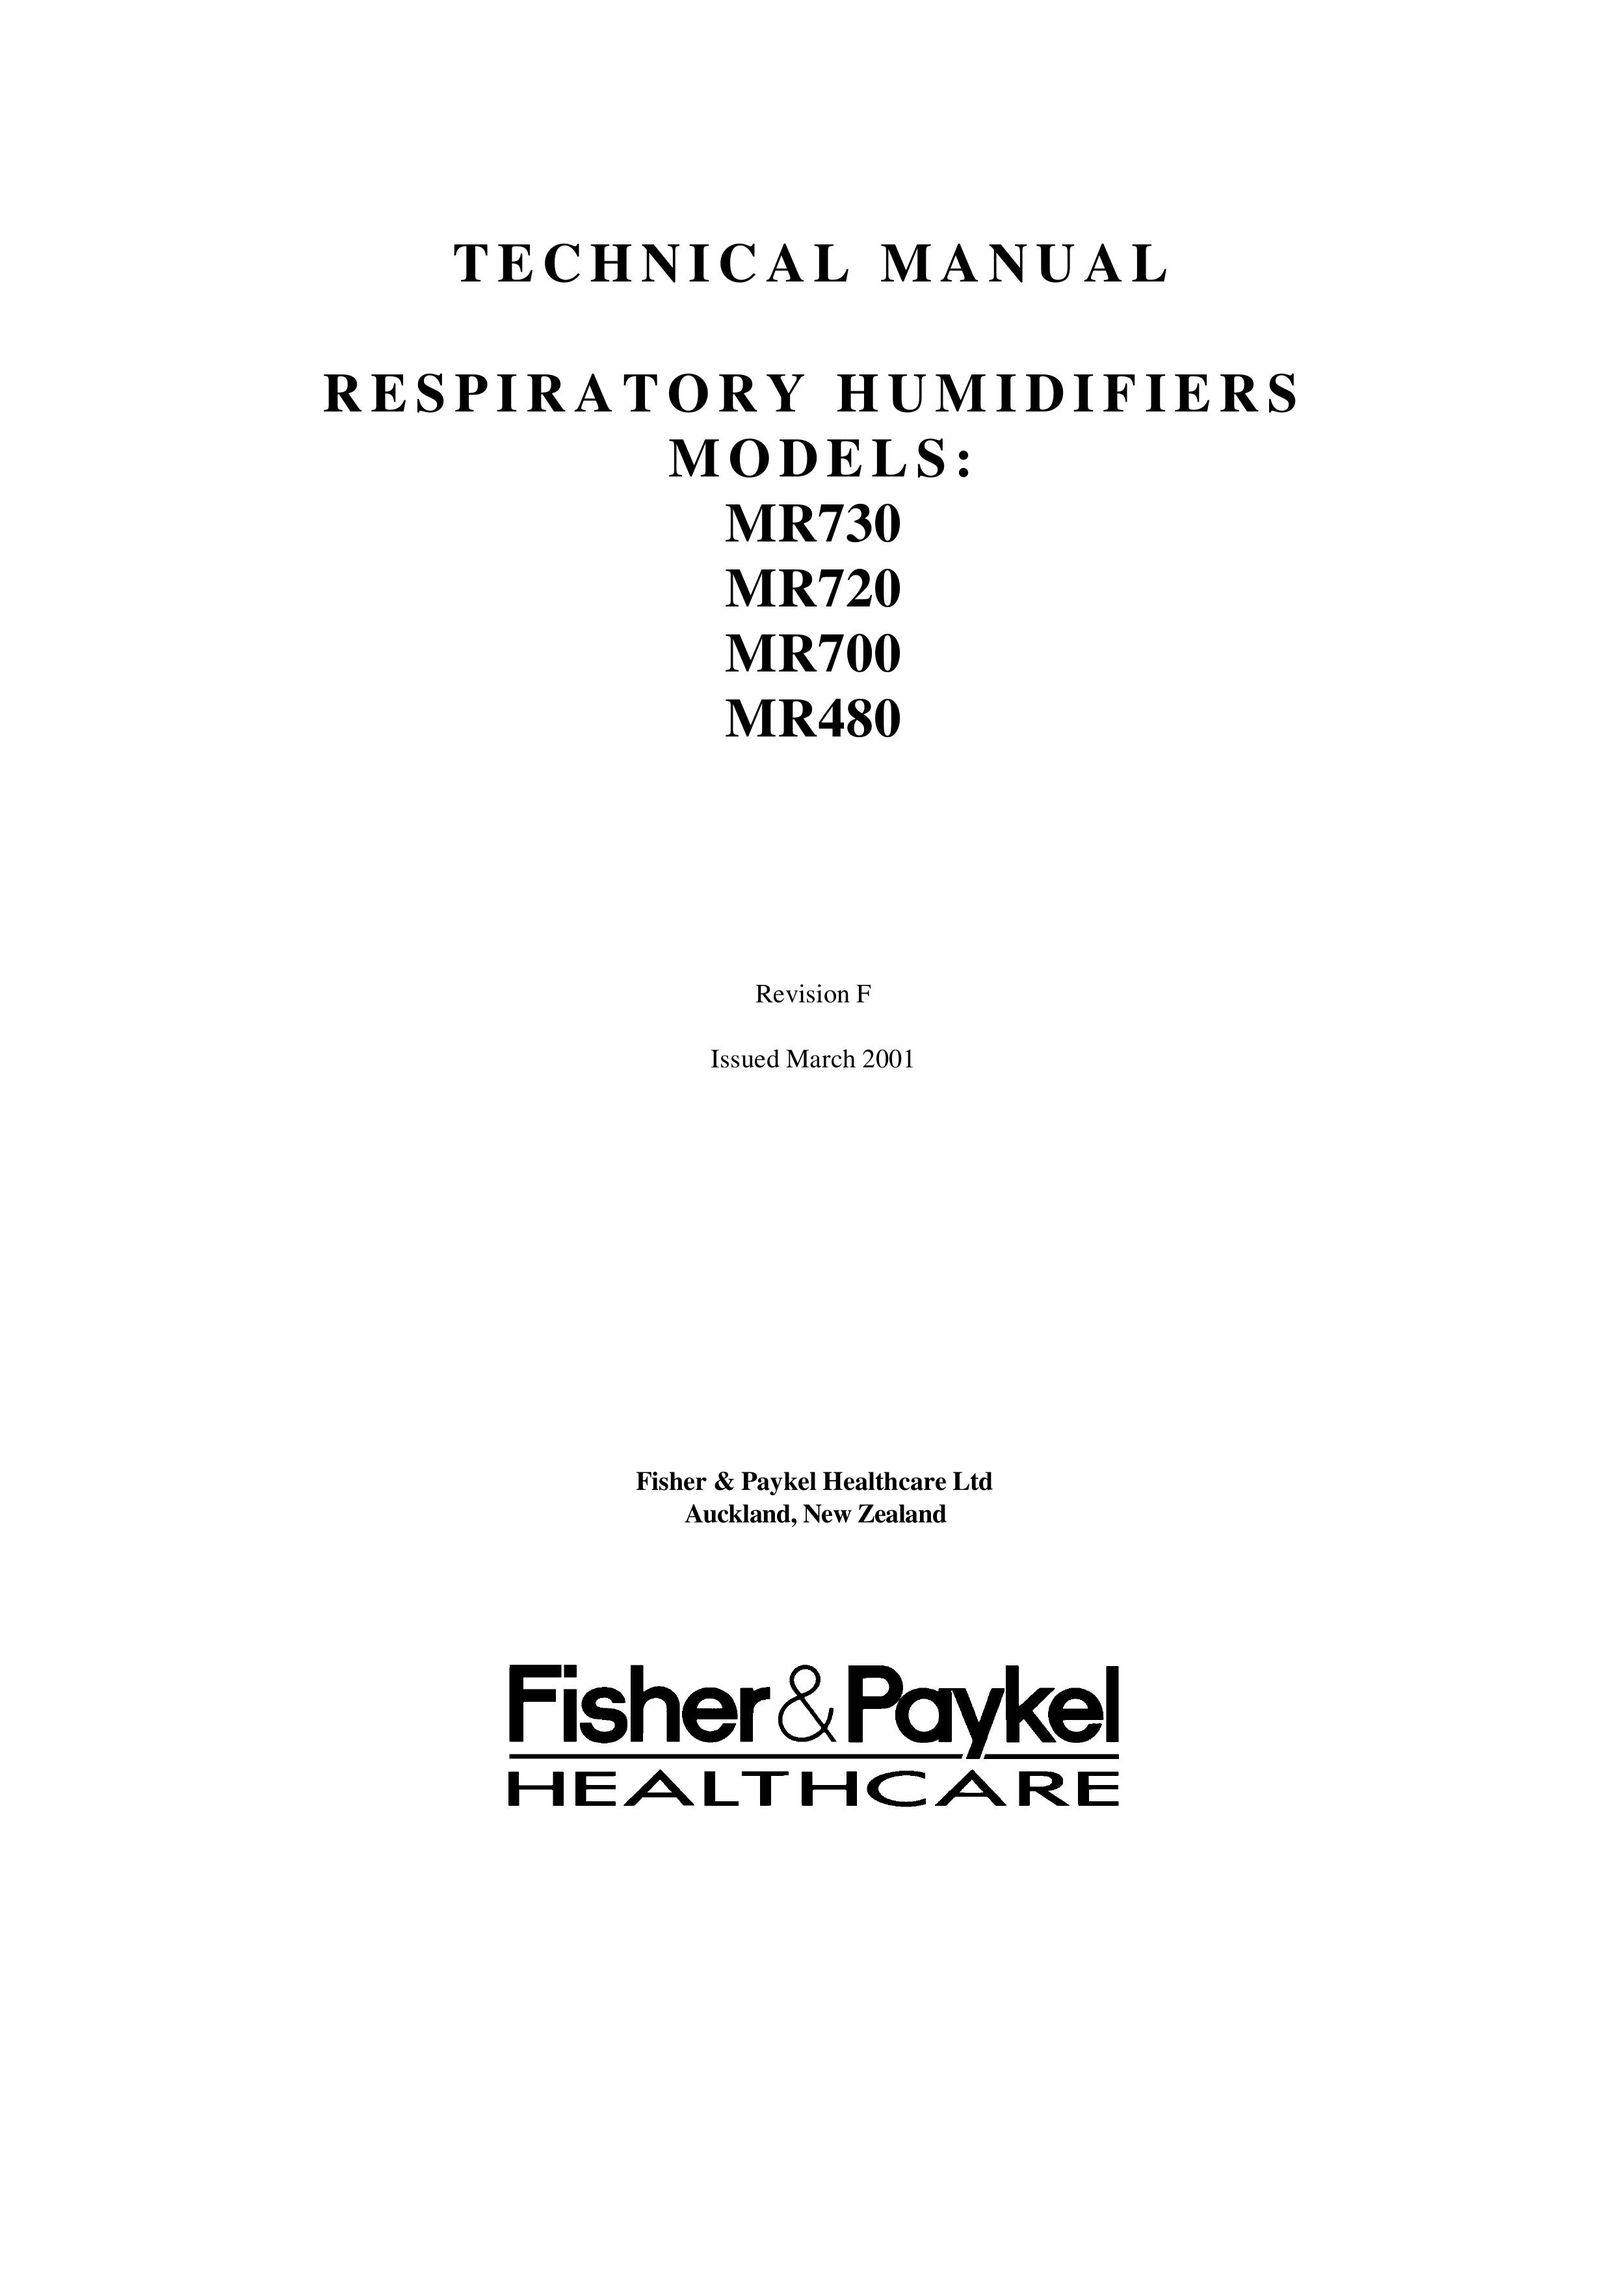 Fisher & Paykel MR730 Humidifier User Manual (Page 1)